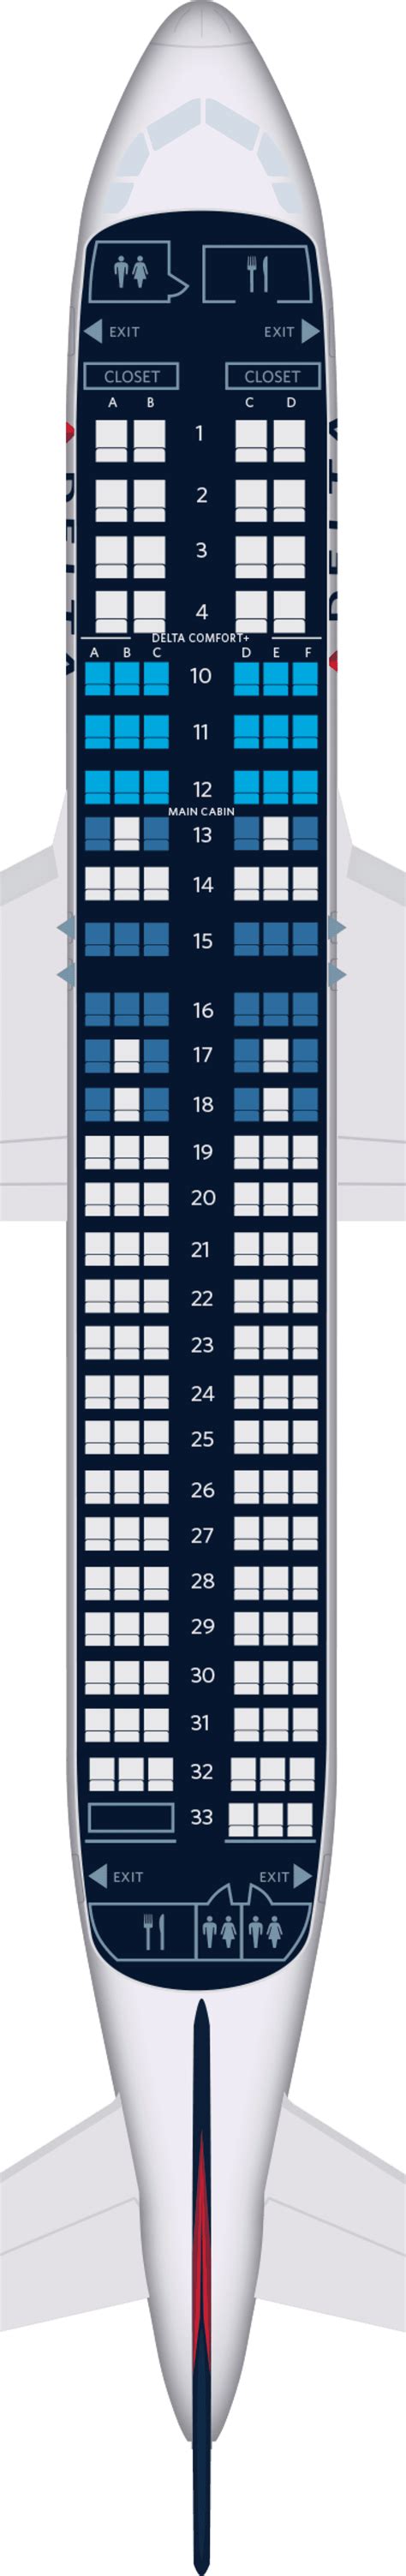 Delta airbus a320 seat map. Standard Economy (Rows 4-8, 11-25) View map. Airbus A320 Layout 3. Recliner First (Rows 1-3) Standard Premium (Rows 6-9) Standard Economy (Rows 10-32) View map. For your next Alaska Airlines flight, use this seating chart to get the most comfortable seats, legroom, and recline on . 